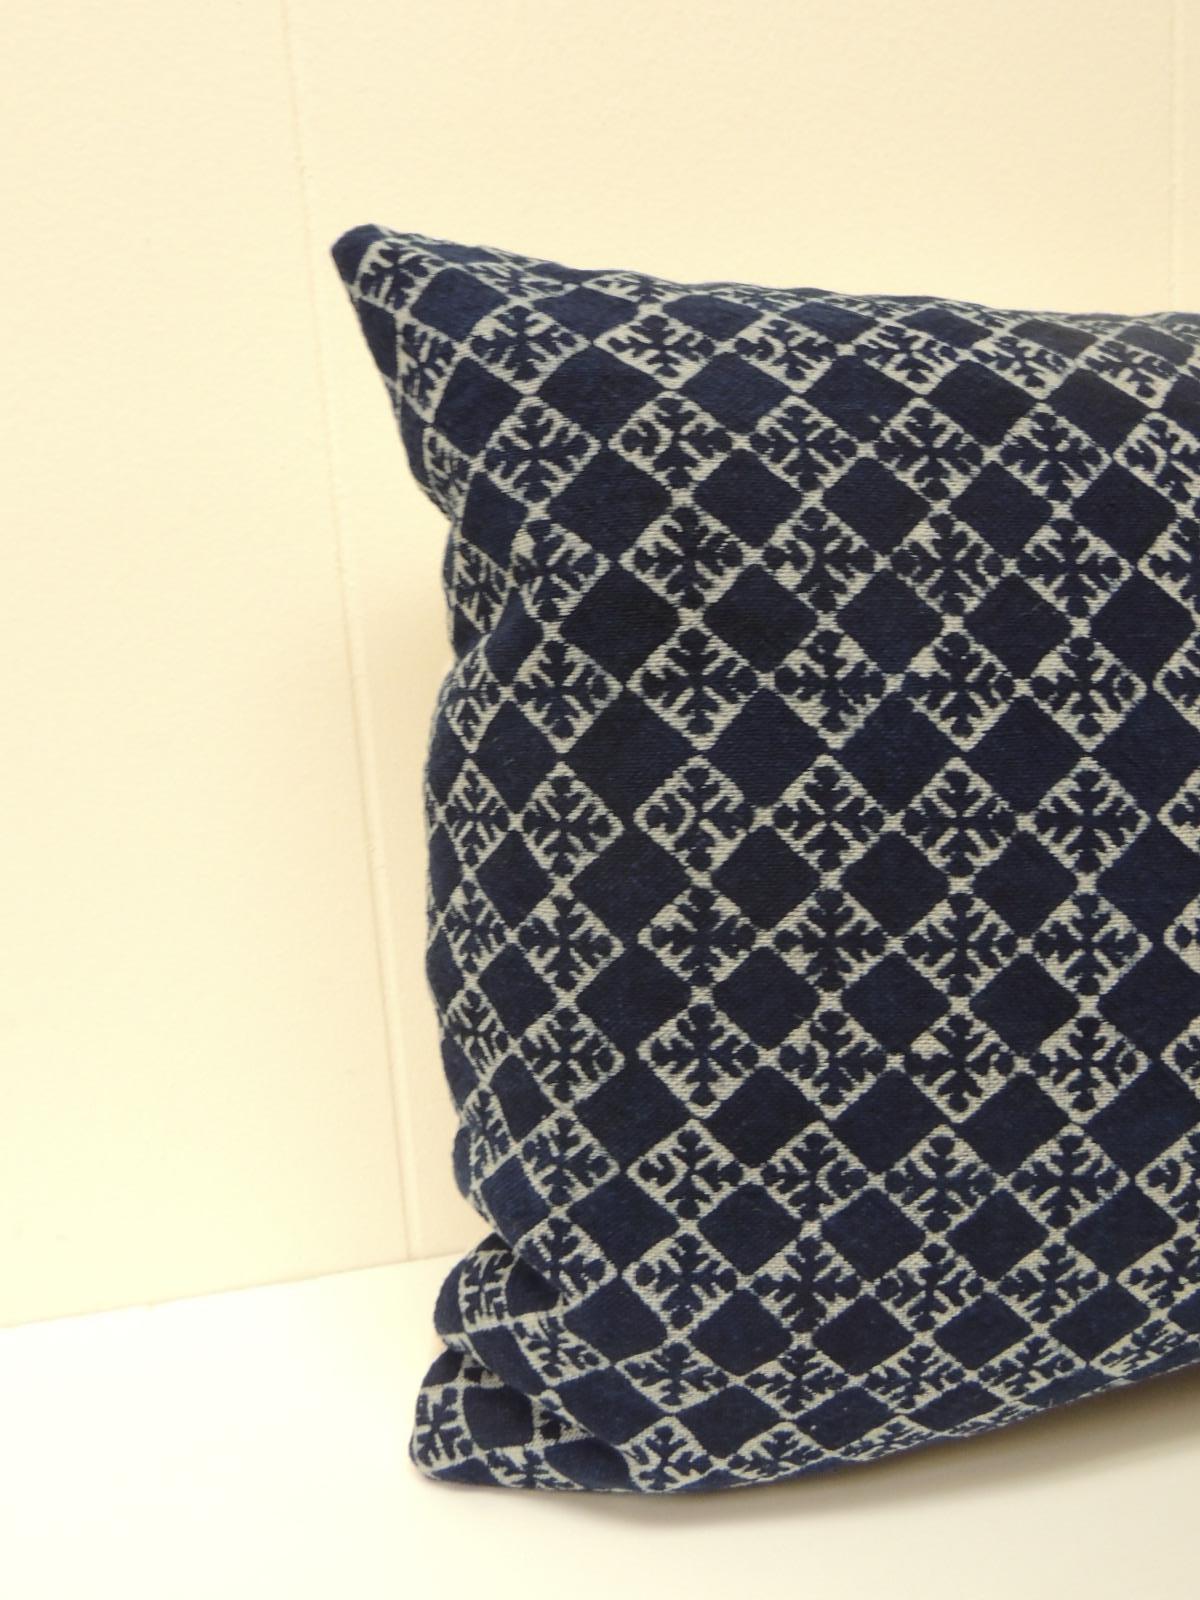 Vintage blue and white hand-blocked decorative lumbar pillow
with a diamond motif pattern. Hand-blocked textile of white onto an indigo background. 
Lumbar decorative pillow finished with a white basket weave backing. 
Decorative pillow handcrafted